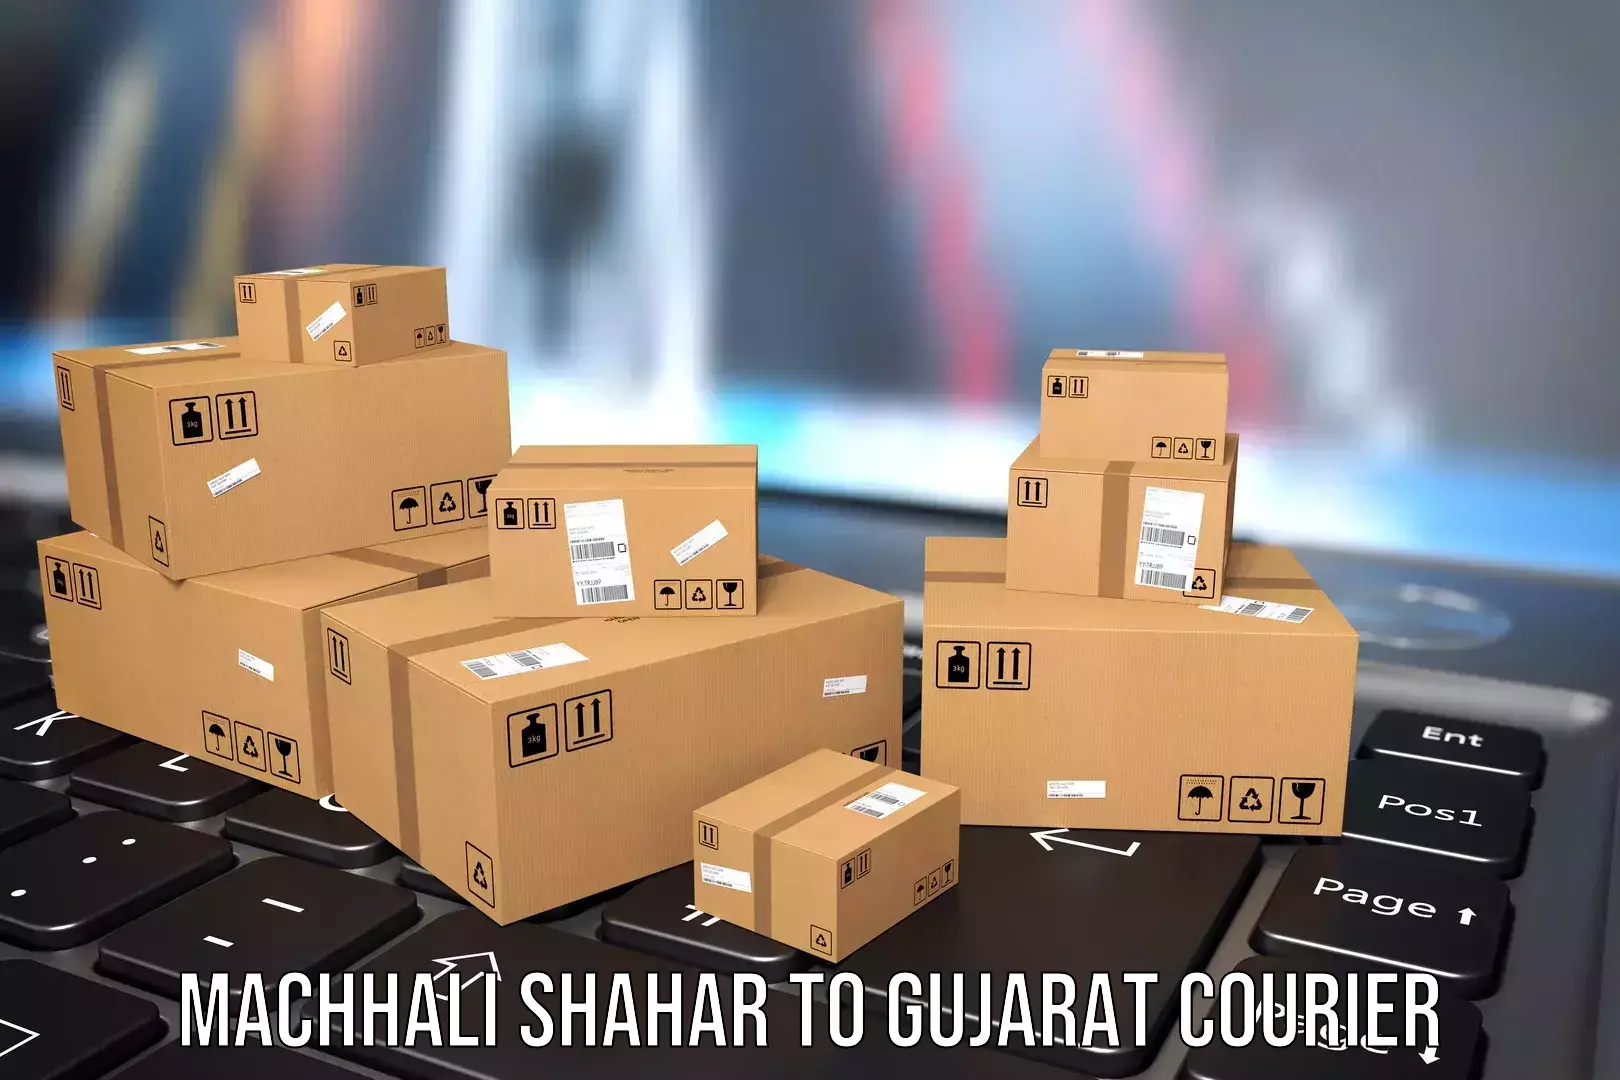 Luggage transport consulting in Machhali Shahar to Gujarat